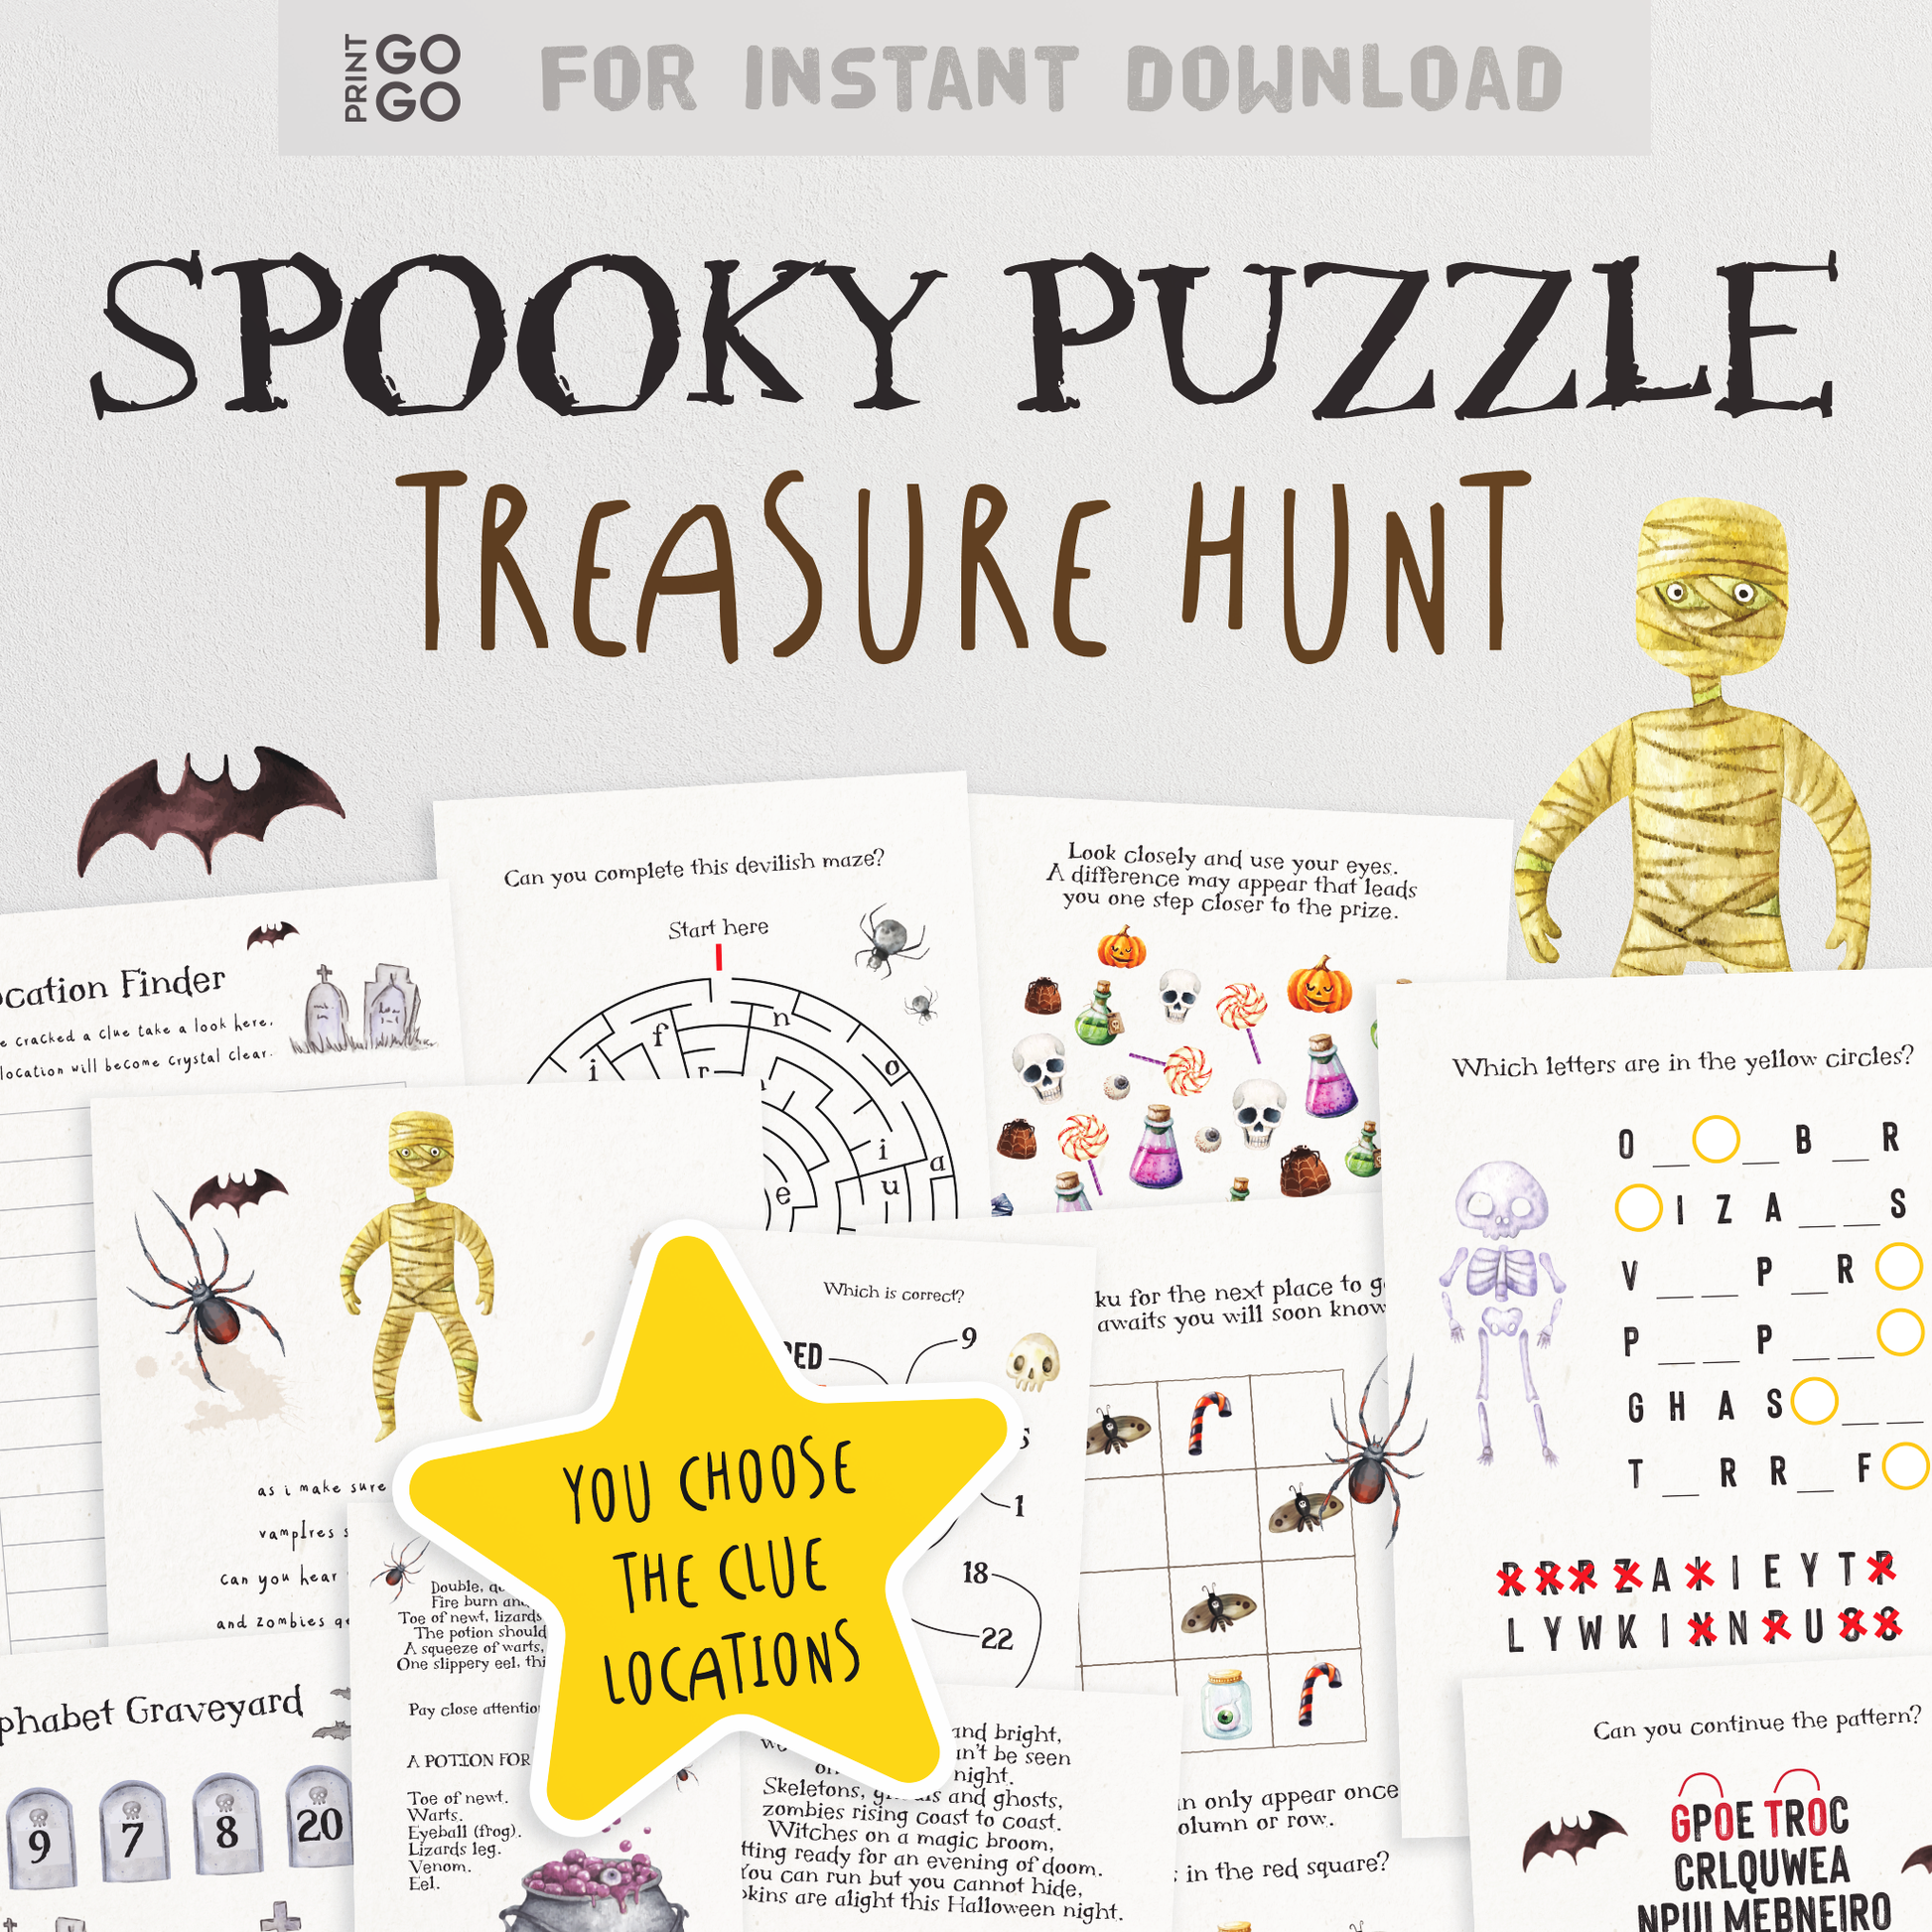 Spooky Puzzle Treasure Hunt - The Ghoulish Search for Candy at Home